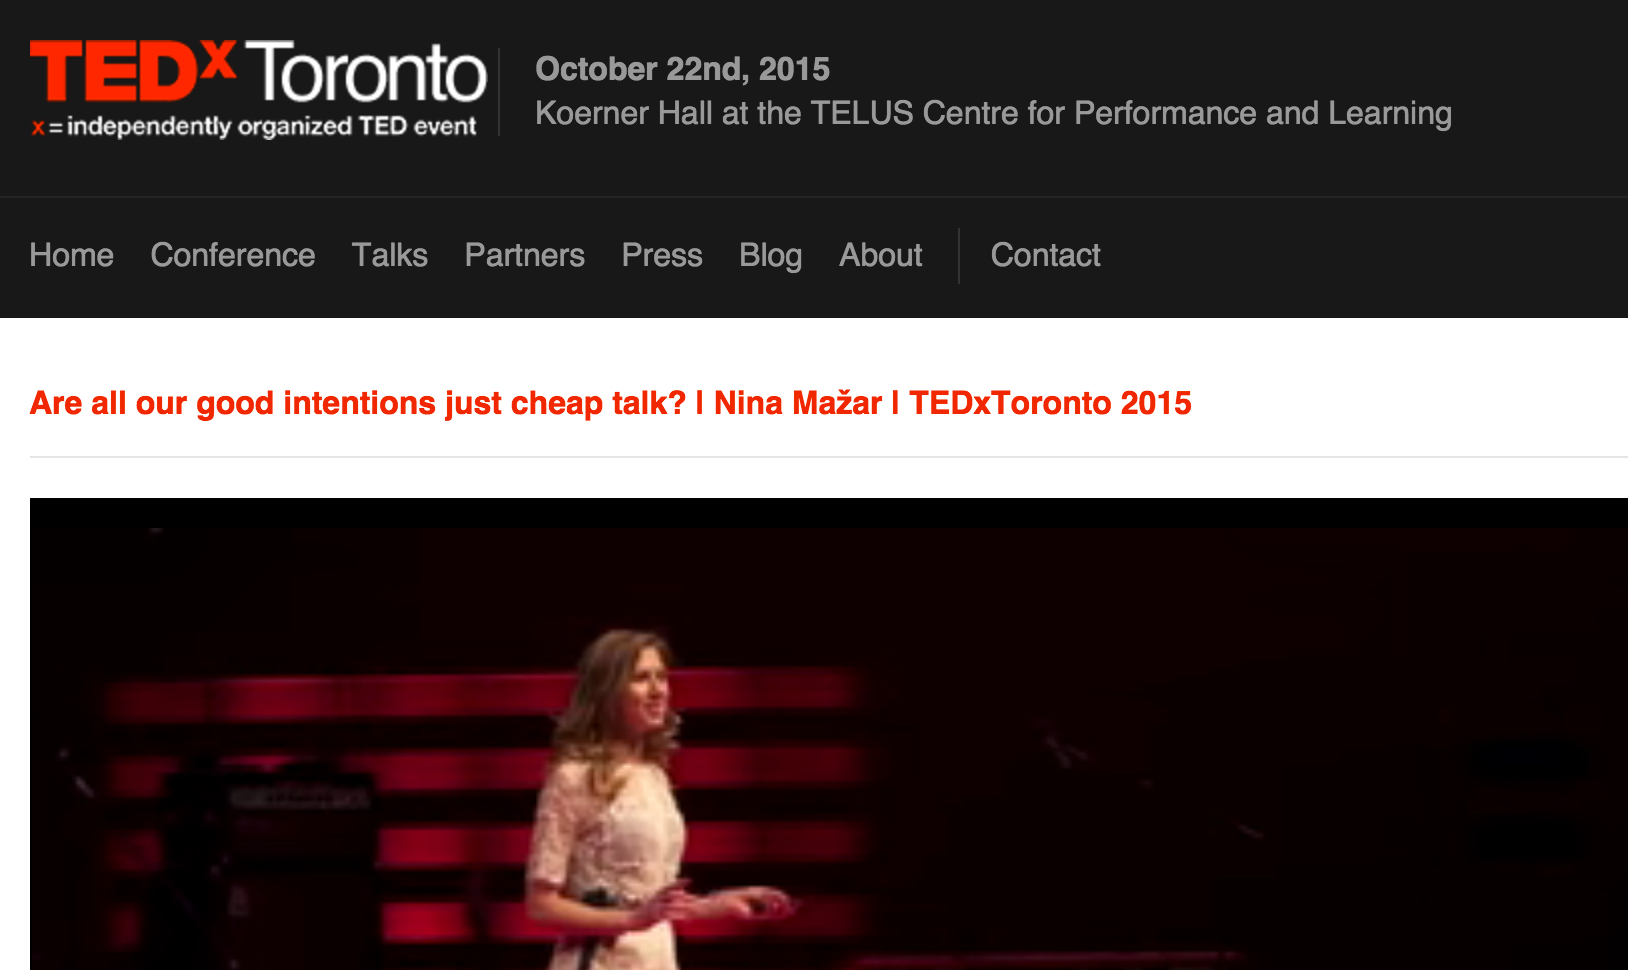 TEDx Talk: “Are All Our Good Intentions Just Cheap Talk?”